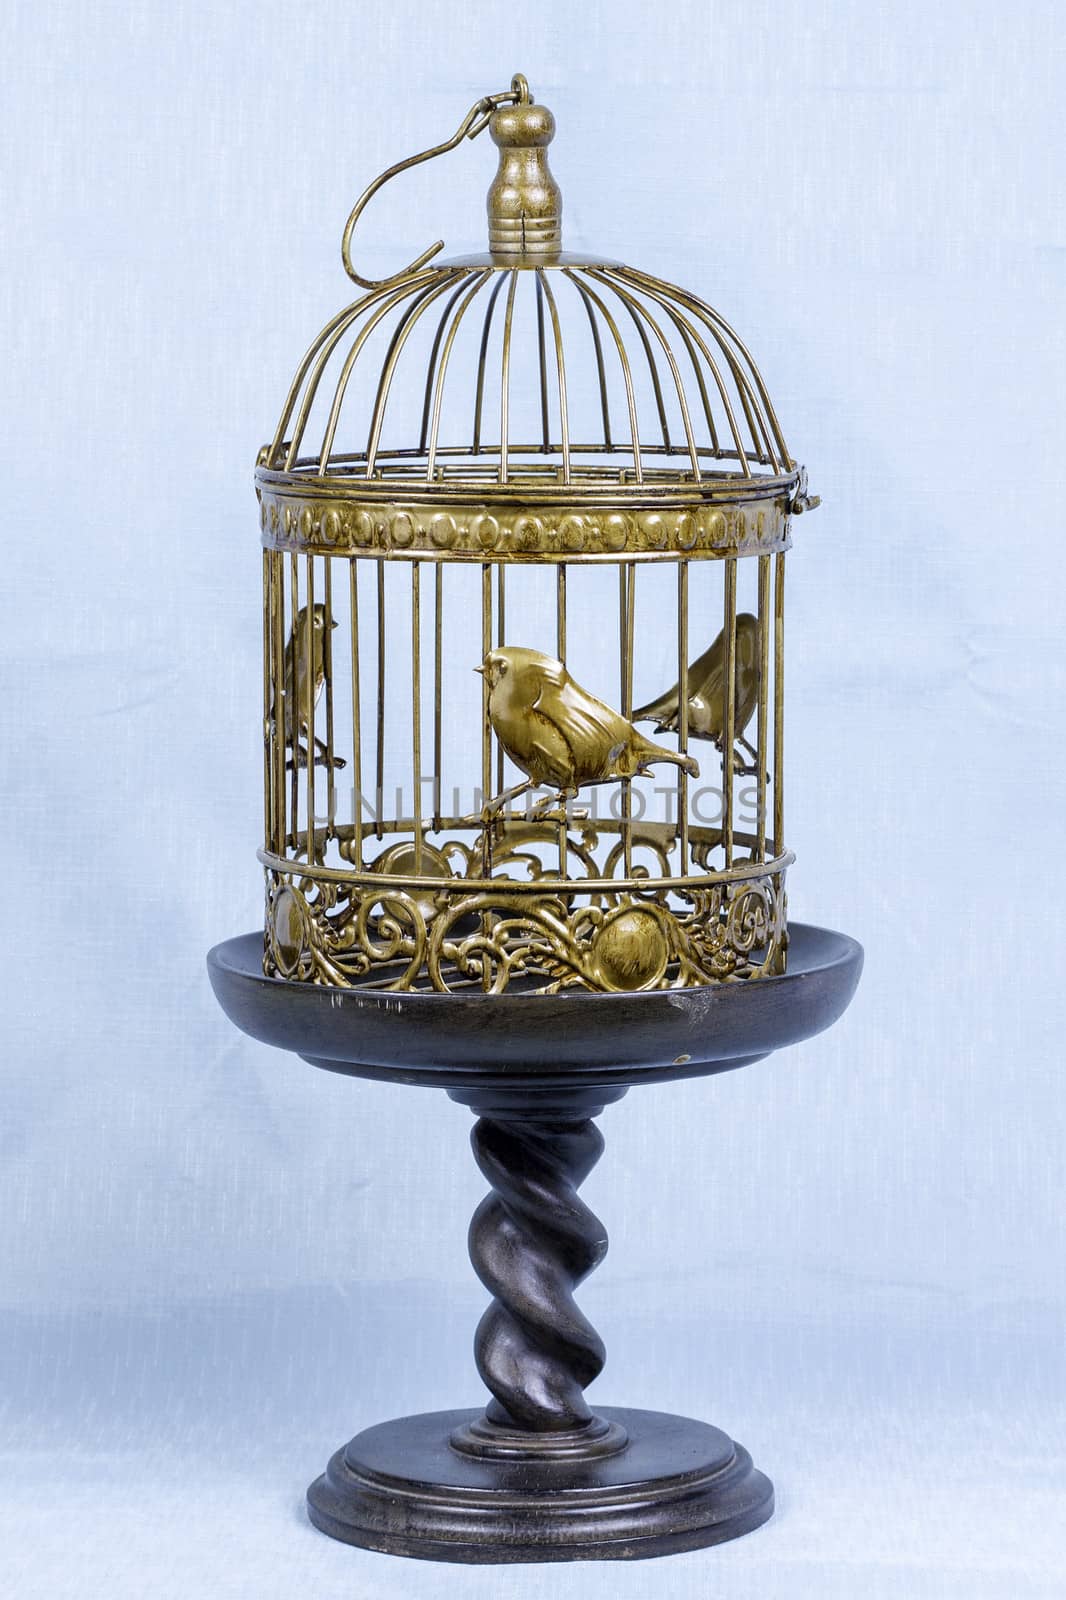 Decorative bird cage sitting on a stand against a light blue background.